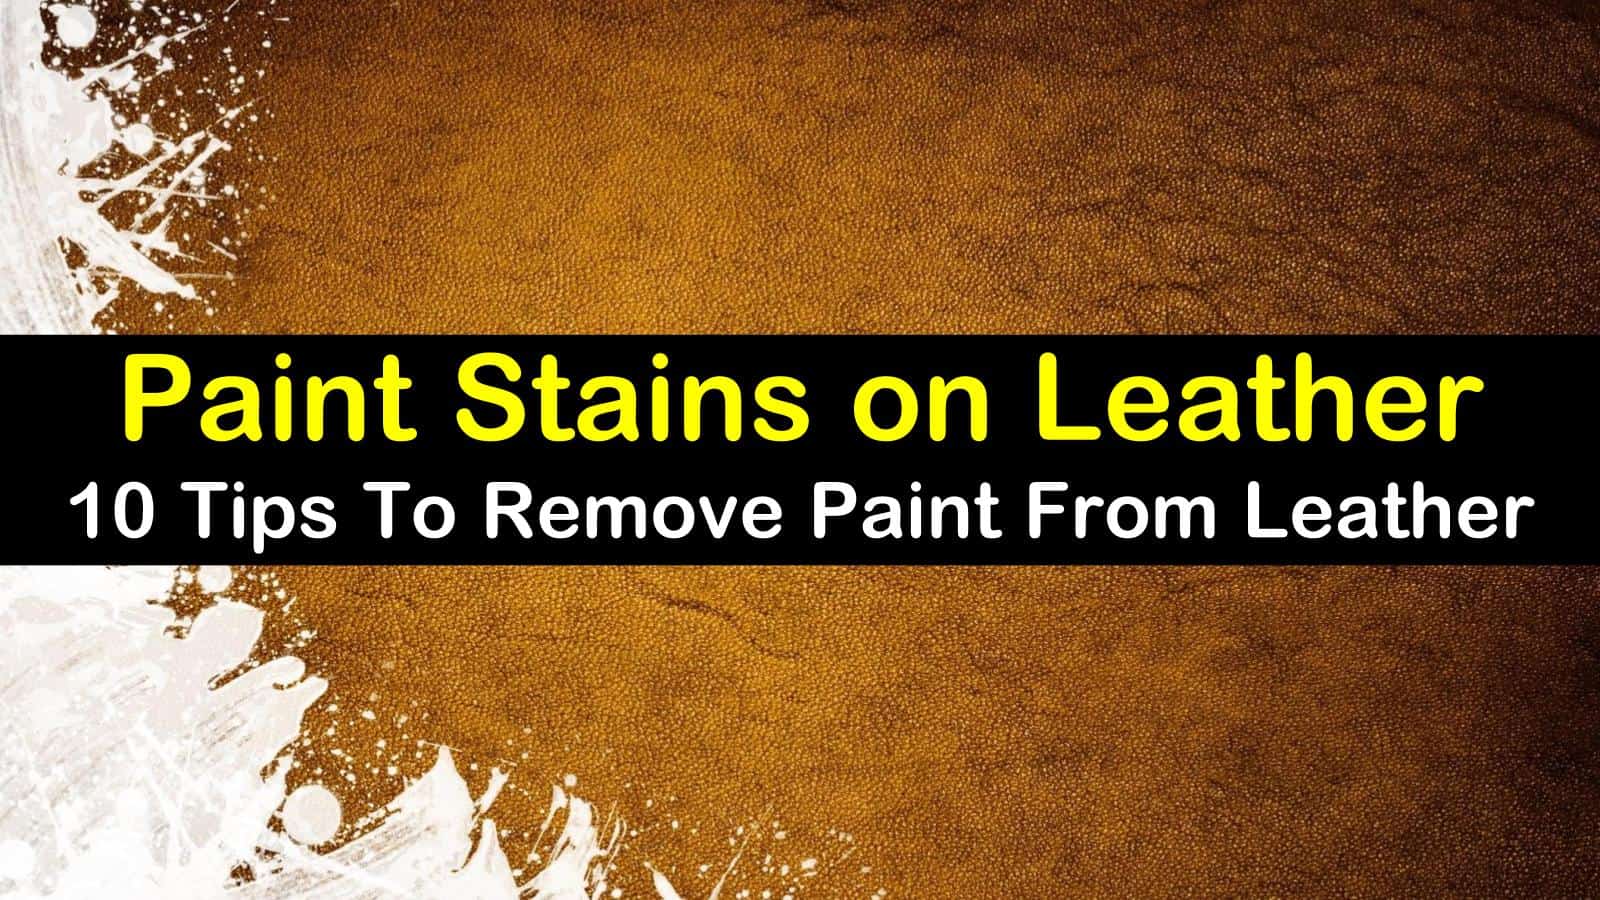 10 Fantastic Ways To Remove Paint From Leather - How To Remove Acrylic Paint From Leather Car Seats